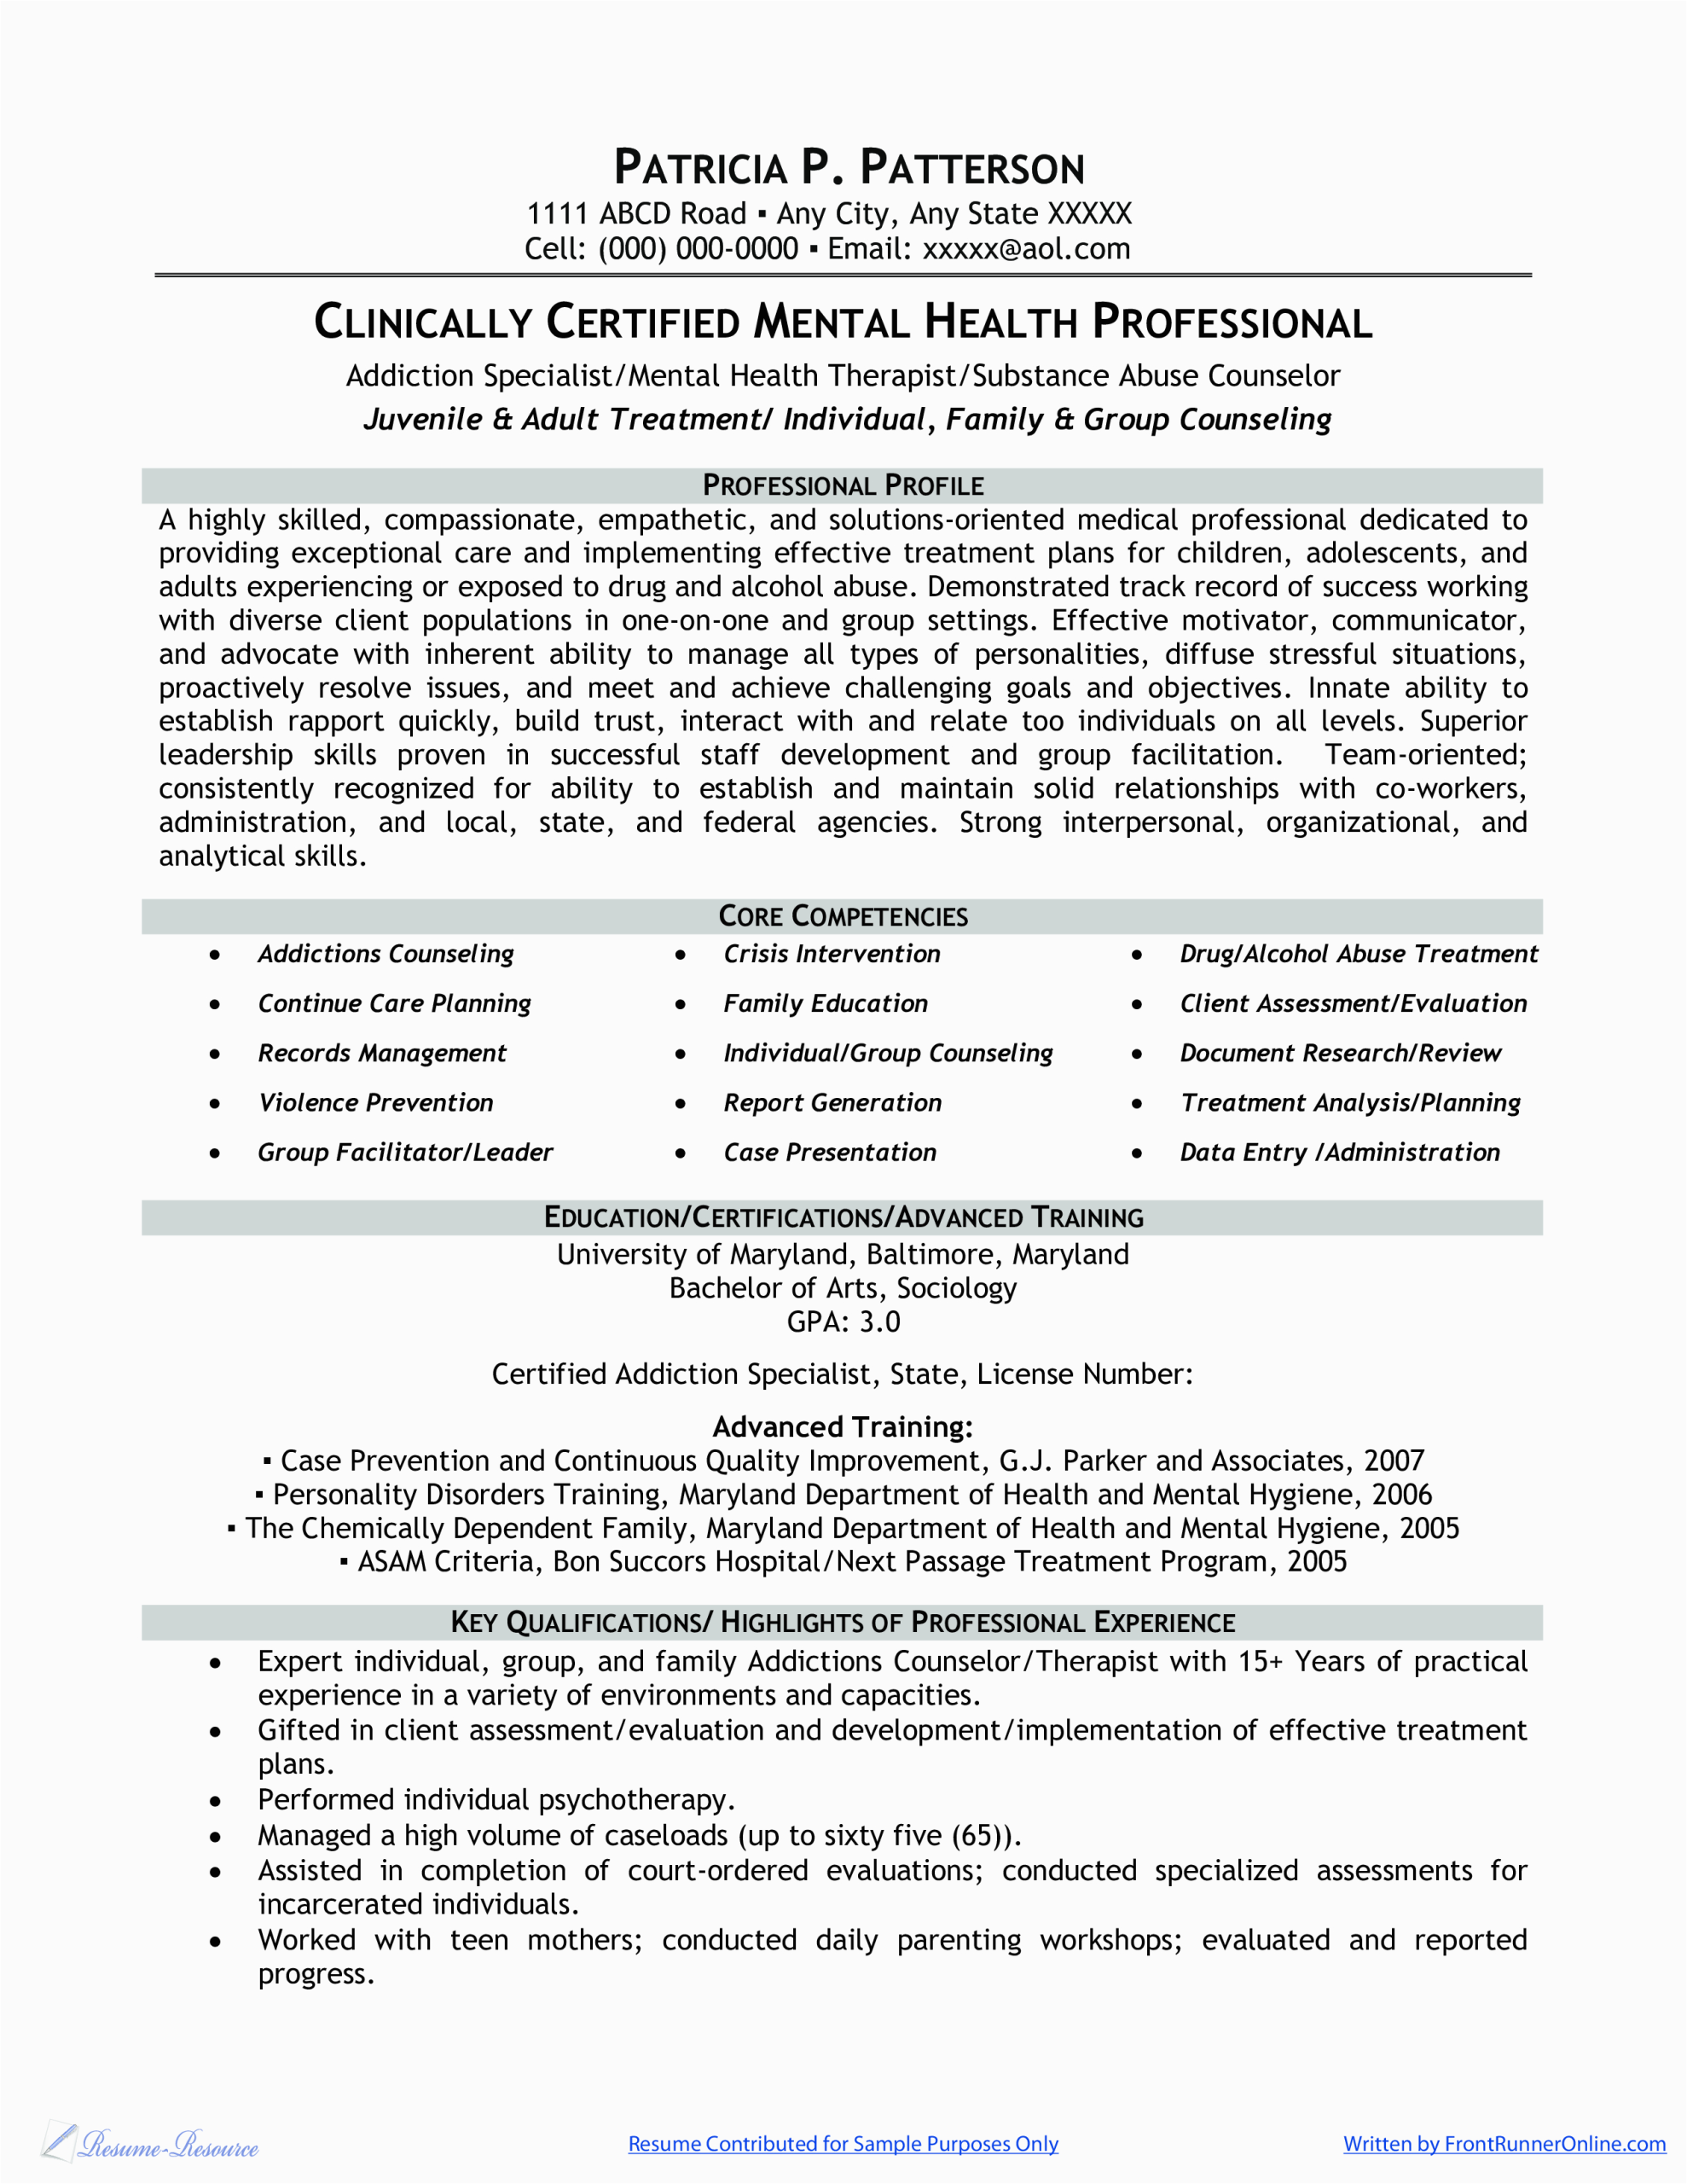 Sample Resume for Professionals In Healthcare Free Clinically Certified Mental Health Professional Resume